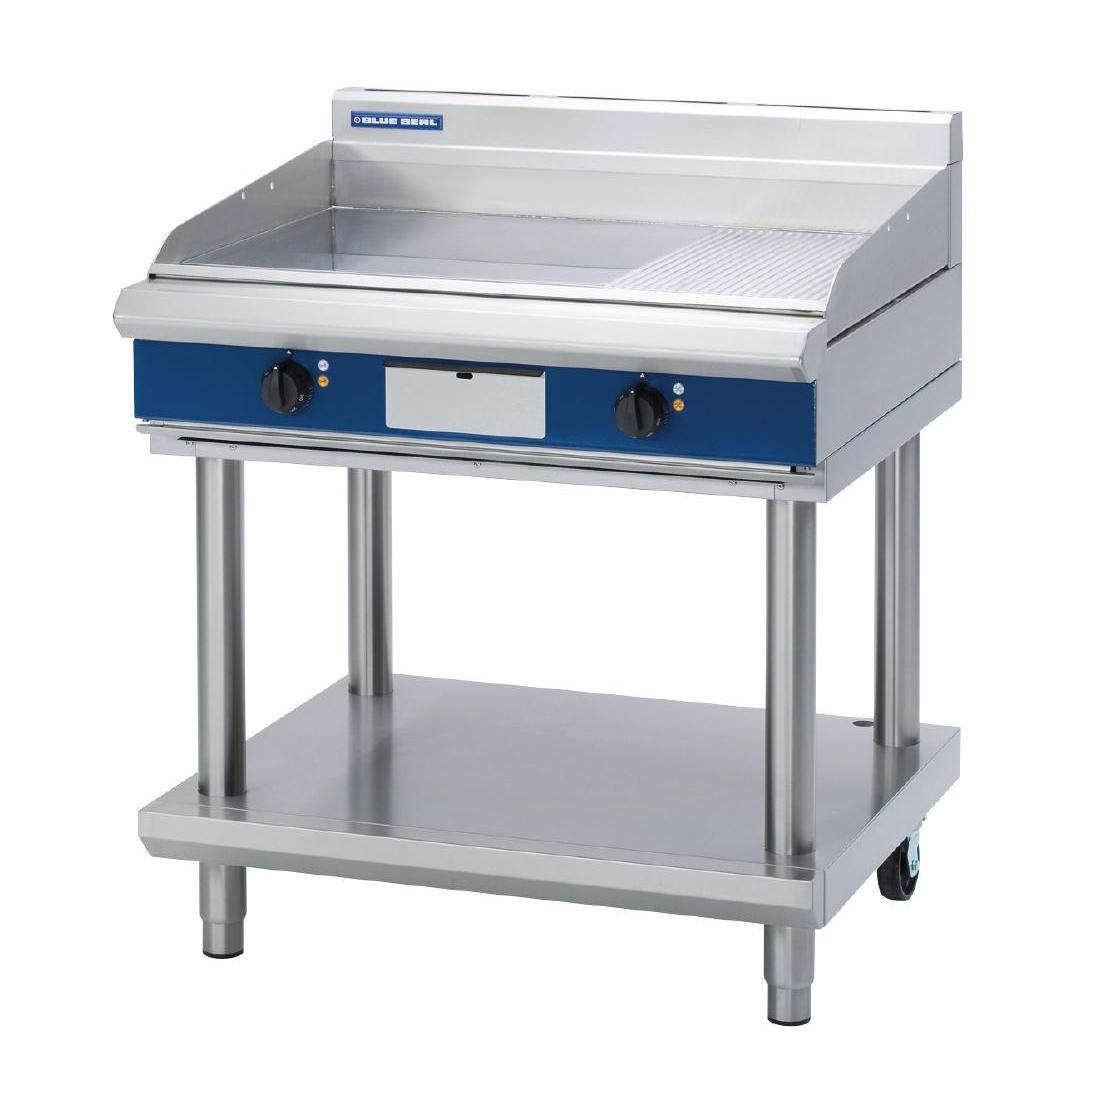 Blue Seal Evolution Griddle with Leg Stand Electric 900mm EP516-LS - GK506  - 1